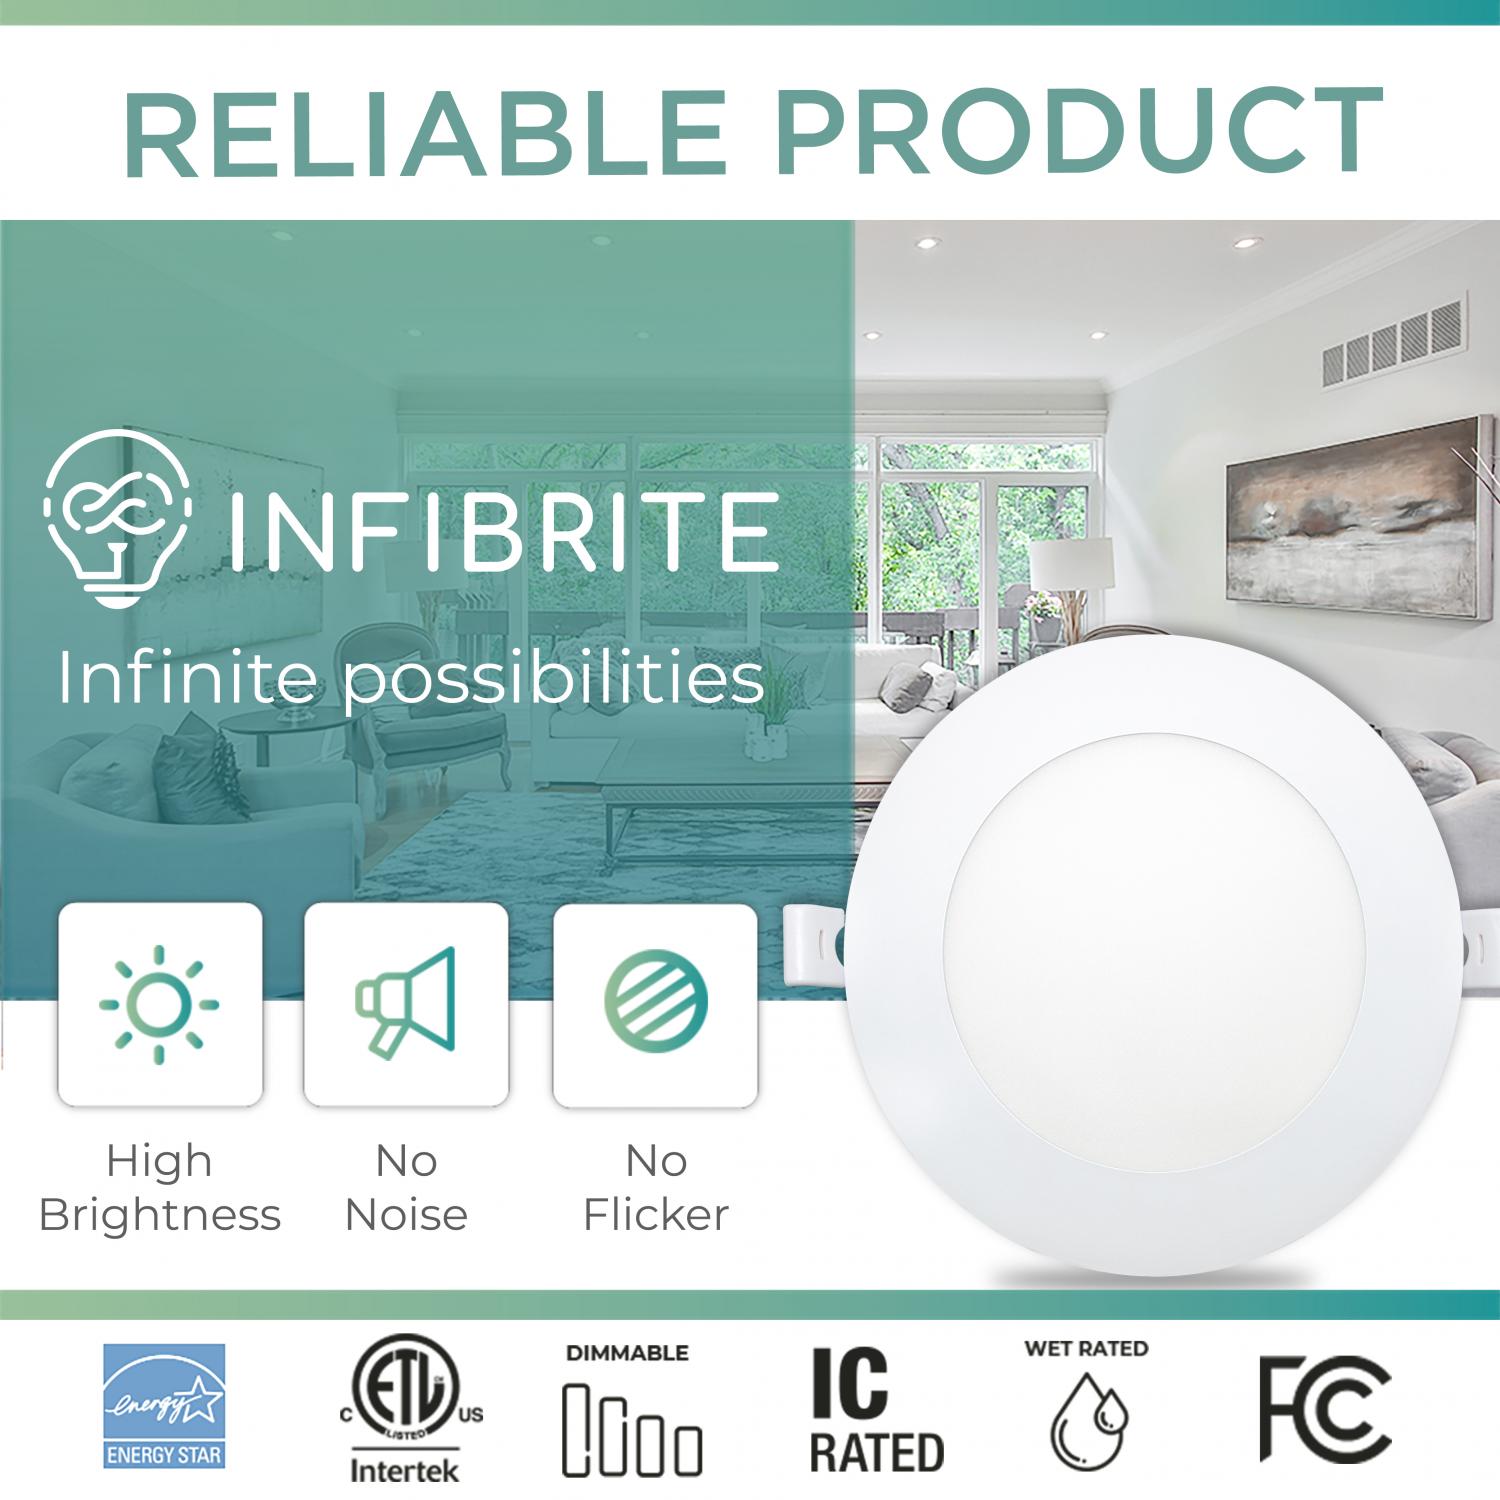 Infibrite 6 Inch 2700K Soft White 12W 1050LM Ultra-Slim LED Ceiling Light with Junction Box, Flush Mount, Dimmable, Fixture for Bedroom, Wet Rated for Bathroom, Easy Install, 110W Eqv, ETL & Energy Star, US Company (6 Pack)